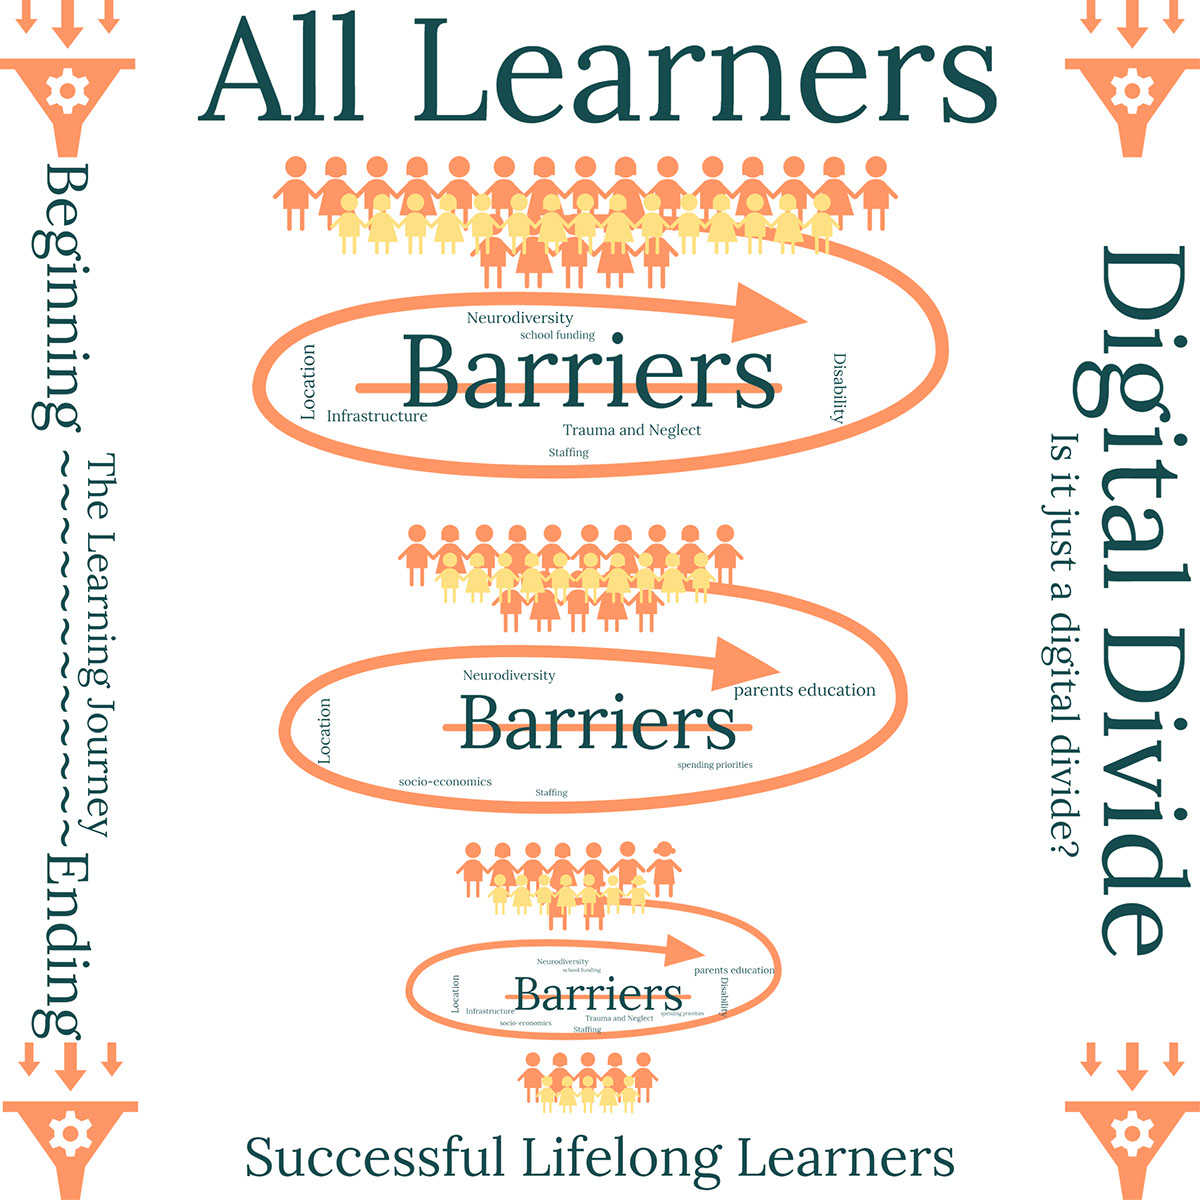 All Learners All Learners Digital Divide Barriers Barriers Beginning ~~~~~~~~~~~~Ending Successful Lifelong Learners Barriers The Learning Journey Is it just a digital divide? Location Location parents education Neurodiversity Disability Infrastructure Trauma and Neglect Neurodiversity socio-economics school funding Staffing Location parents education Disability Staffing spending priorities Neurodiversity Staffing Trauma and Neglect Infrastructure socio-economics school funding spending priorities